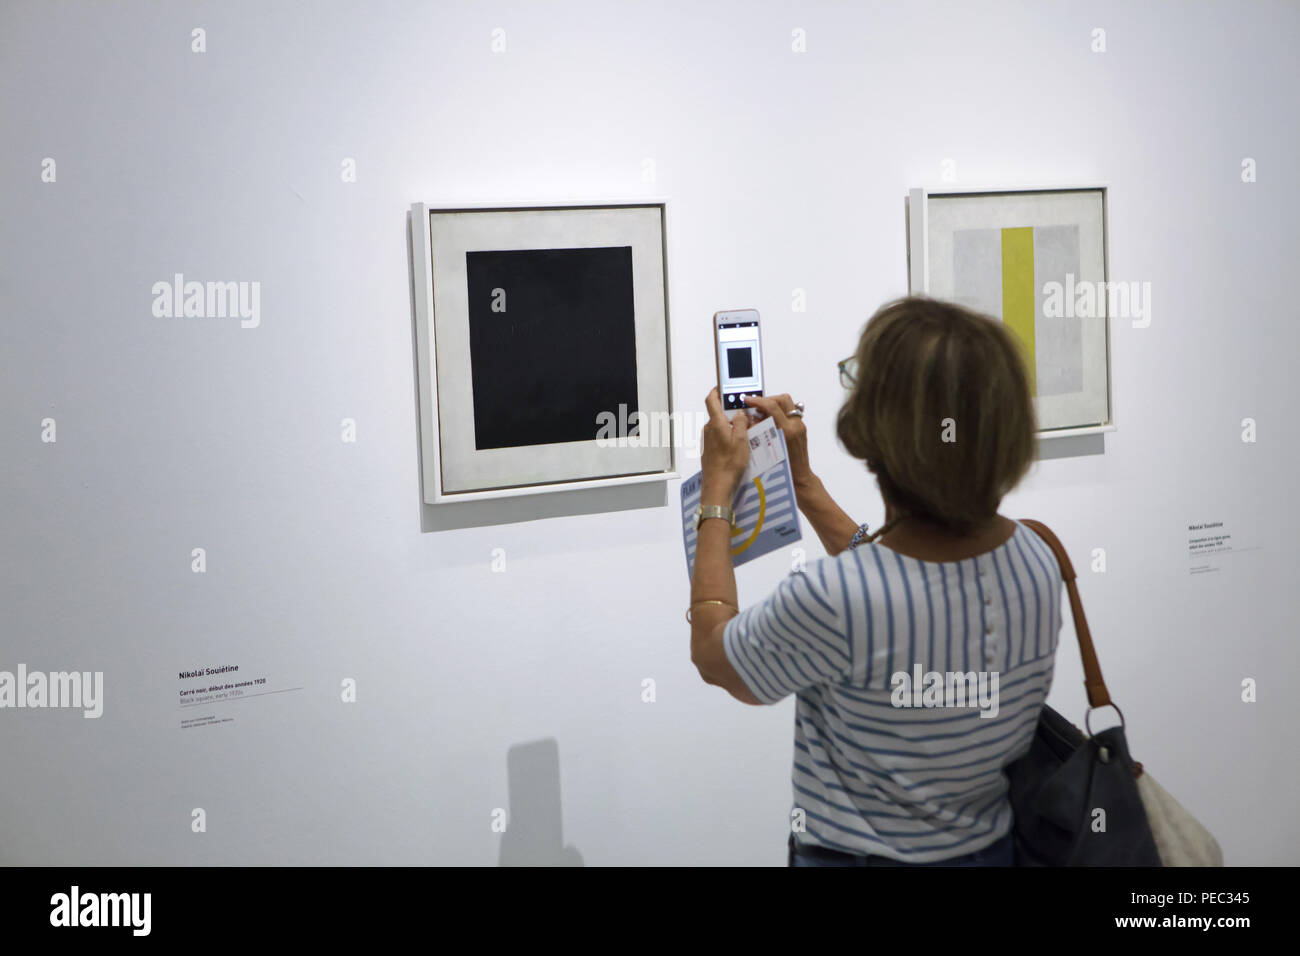 Visitor uses a smartphone to photograph the painting 'Black Square' by Russian avant-garde painter Nikolai Suetin dated from the early 1920s displayed at the exhibition in the Centre Pompidou in Paris, France. The painting is a copy after the famous painting by Russian avant-garde painter Kazimir Malevich. Painting by Nikolai Suetin entitled 'Composition with a Yellow Stripe' from the early 1920s is seen in the picture at the right. The exhibition devoted to the Russian avant-garde in Vitebsk (1918-1922) runs till 16 July 2018. Stock Photo